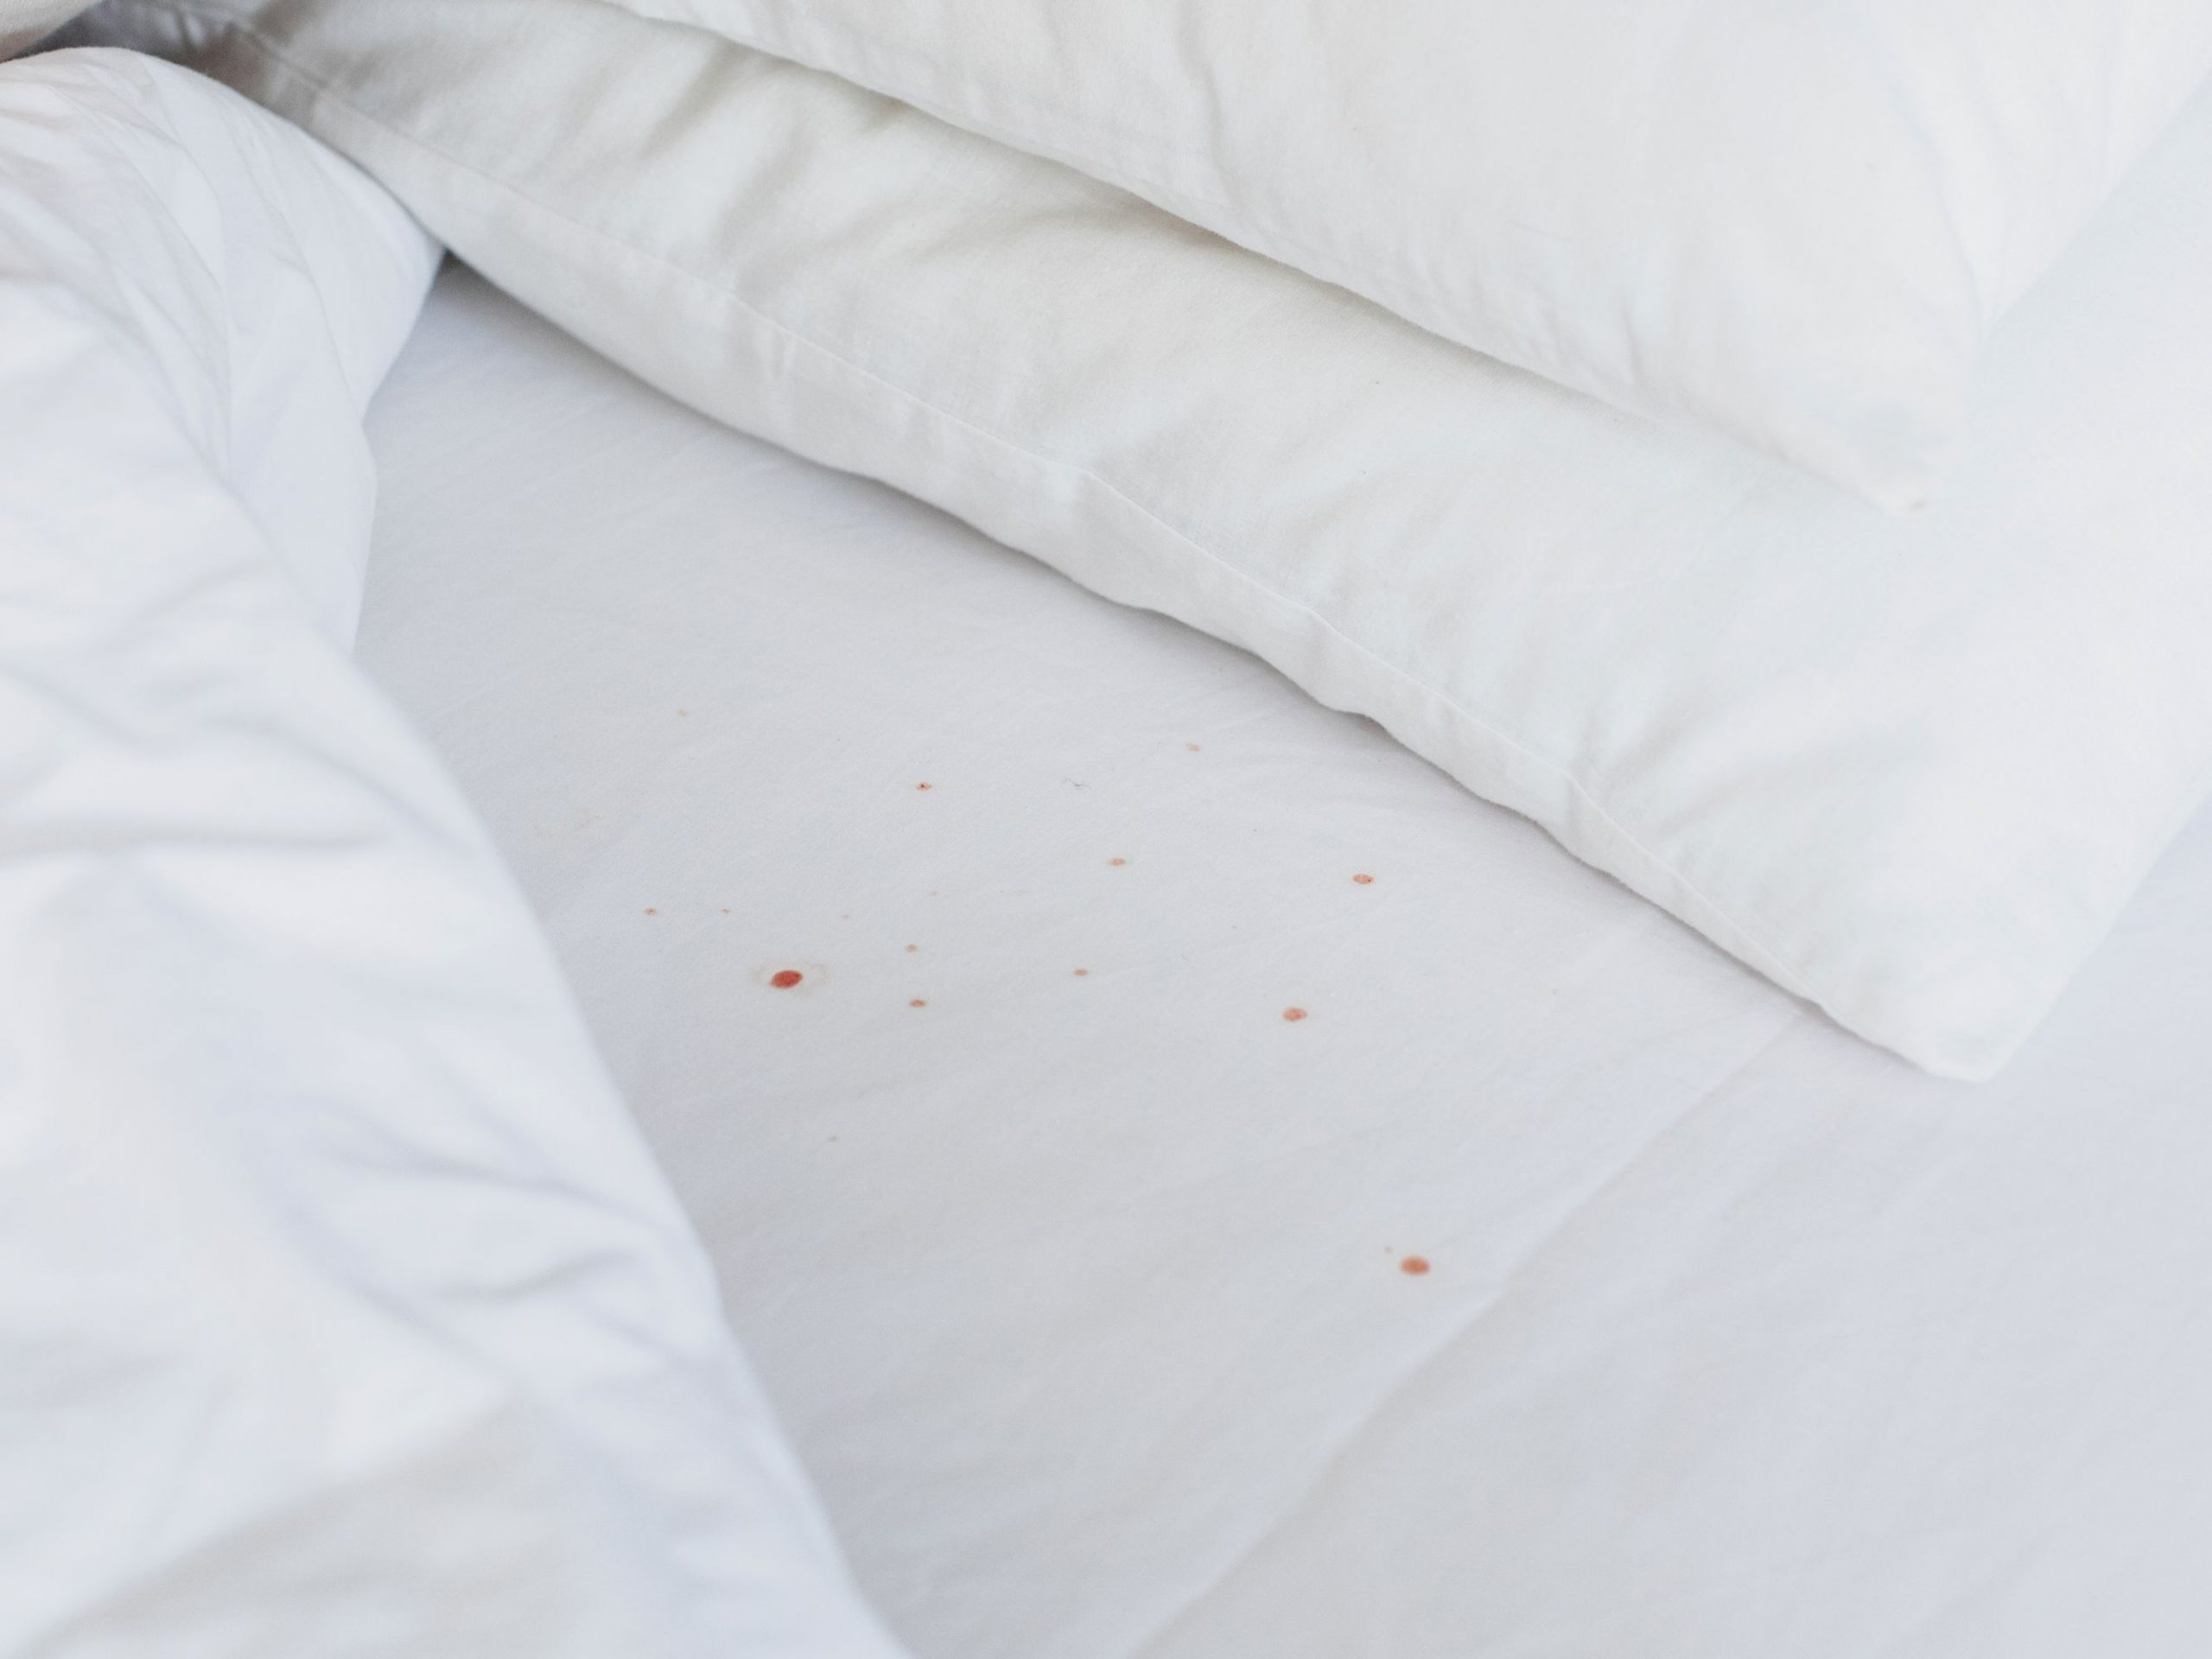 stains on bed mattress